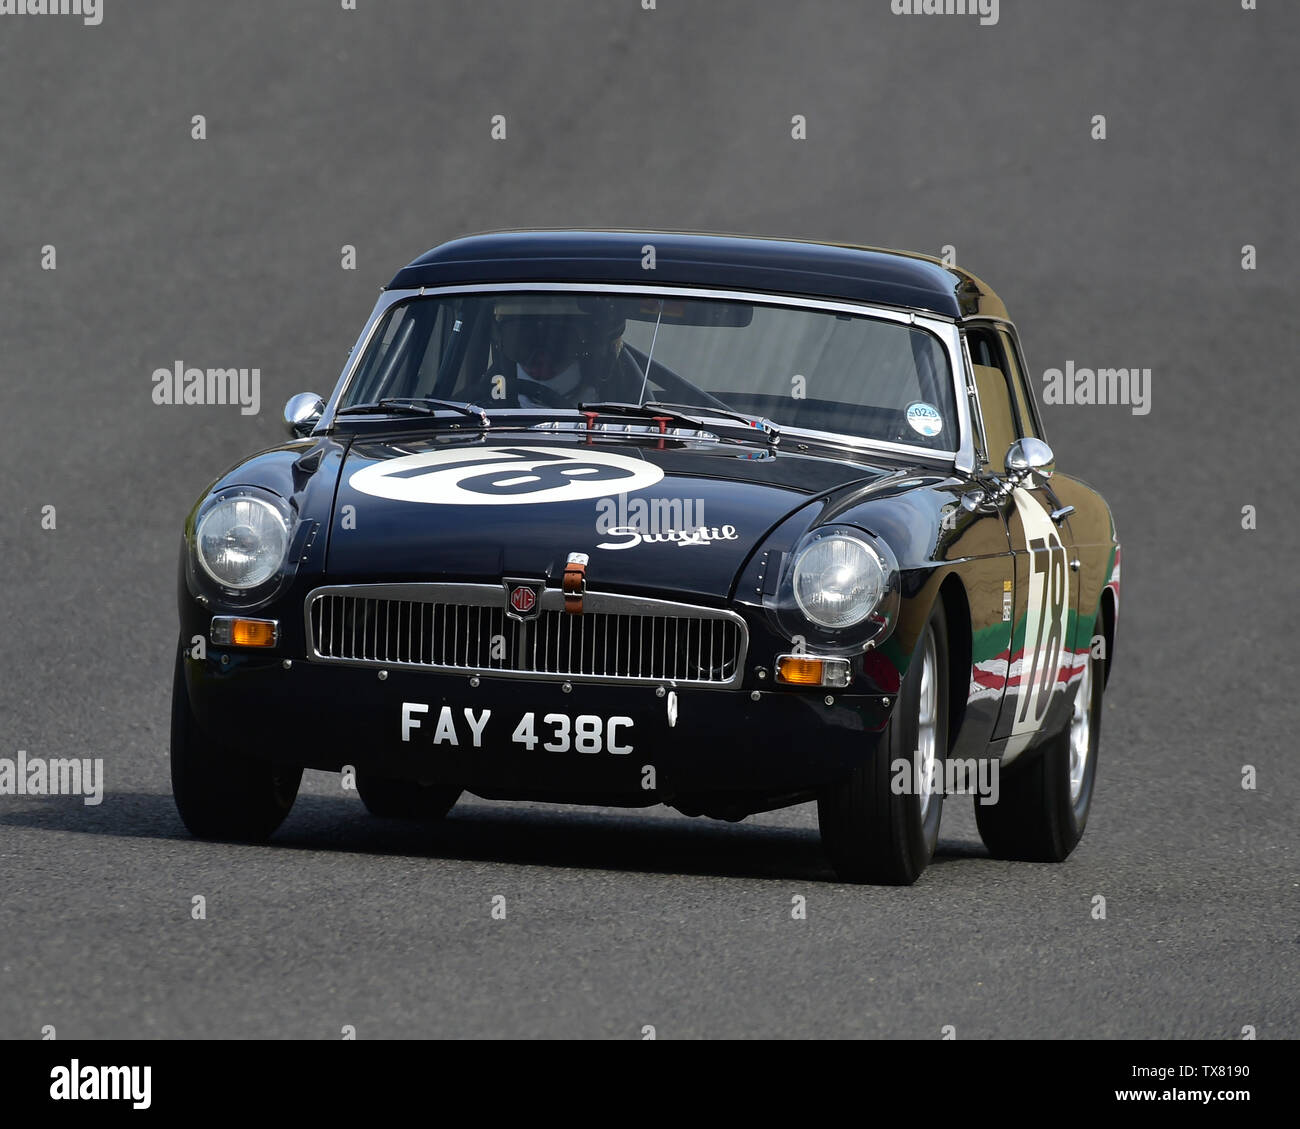 David Russell Wilks, MGB, Equipe GTS, Masters Historic Festival, Brands Hatch, May 2019. Brands Hatch, classic cars, classic event, Classic Racing Car Stock Photo